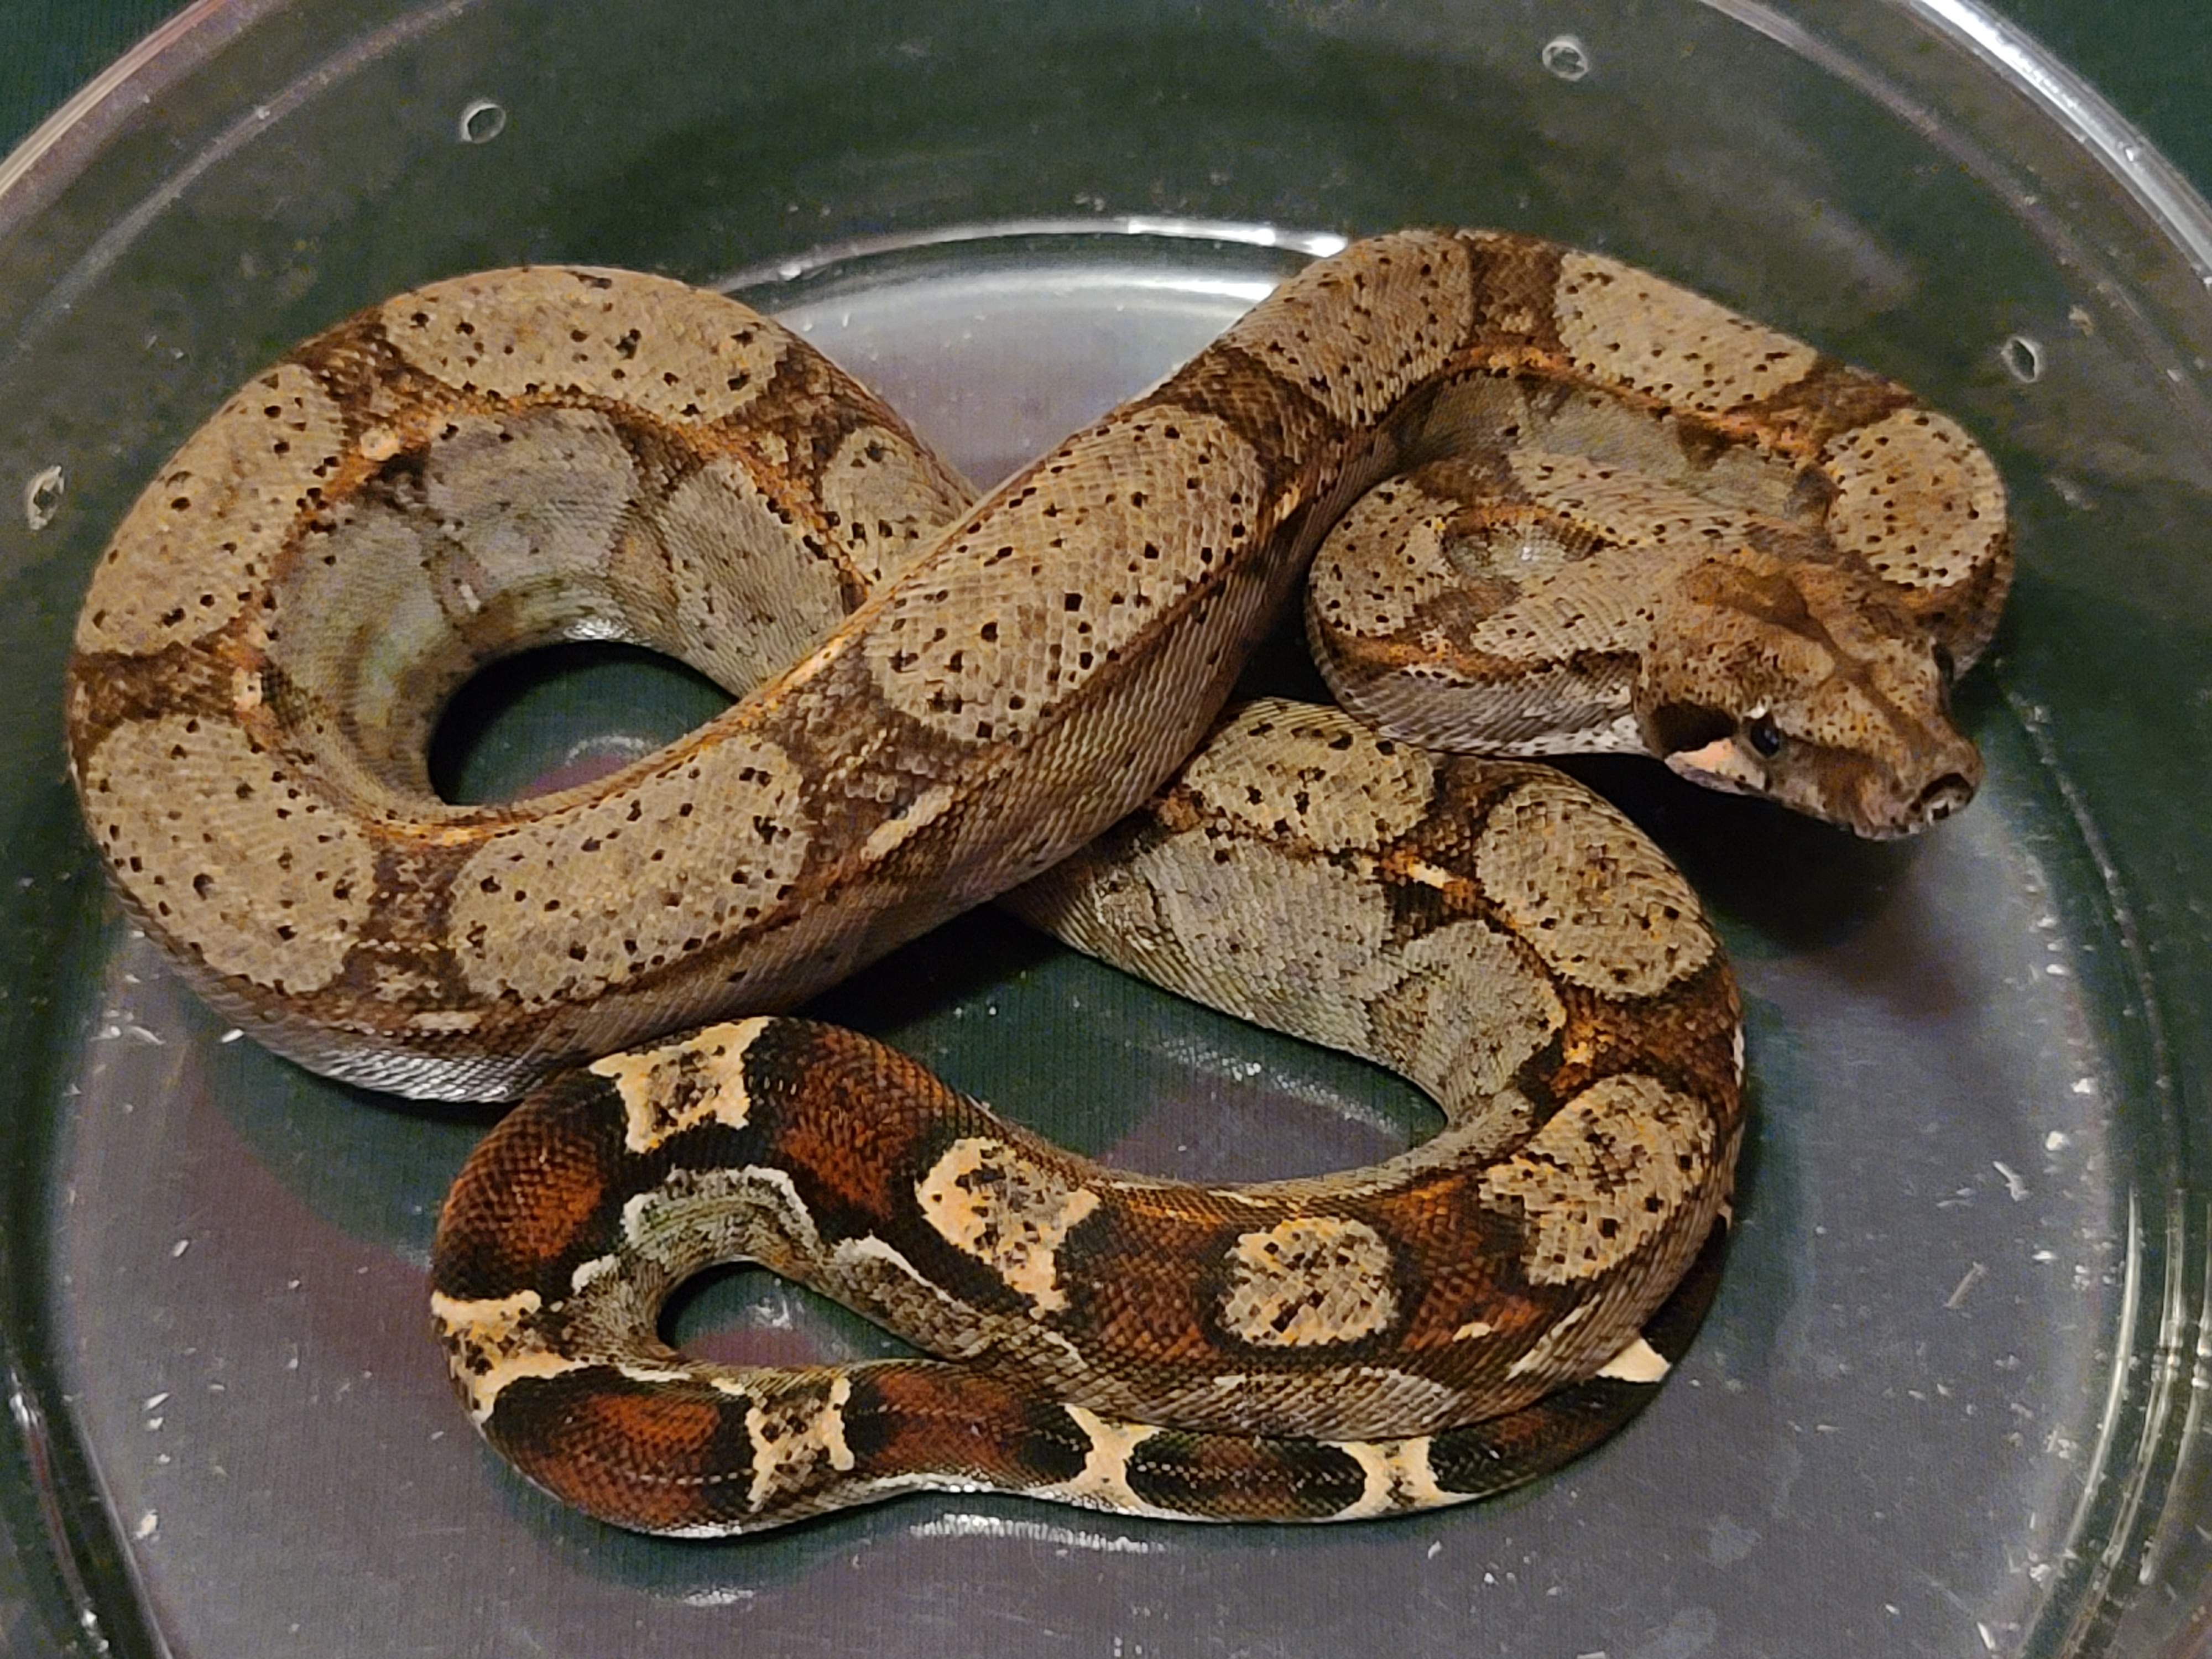 Rlt Boa Constrictor by Extraordinary Ectotherms